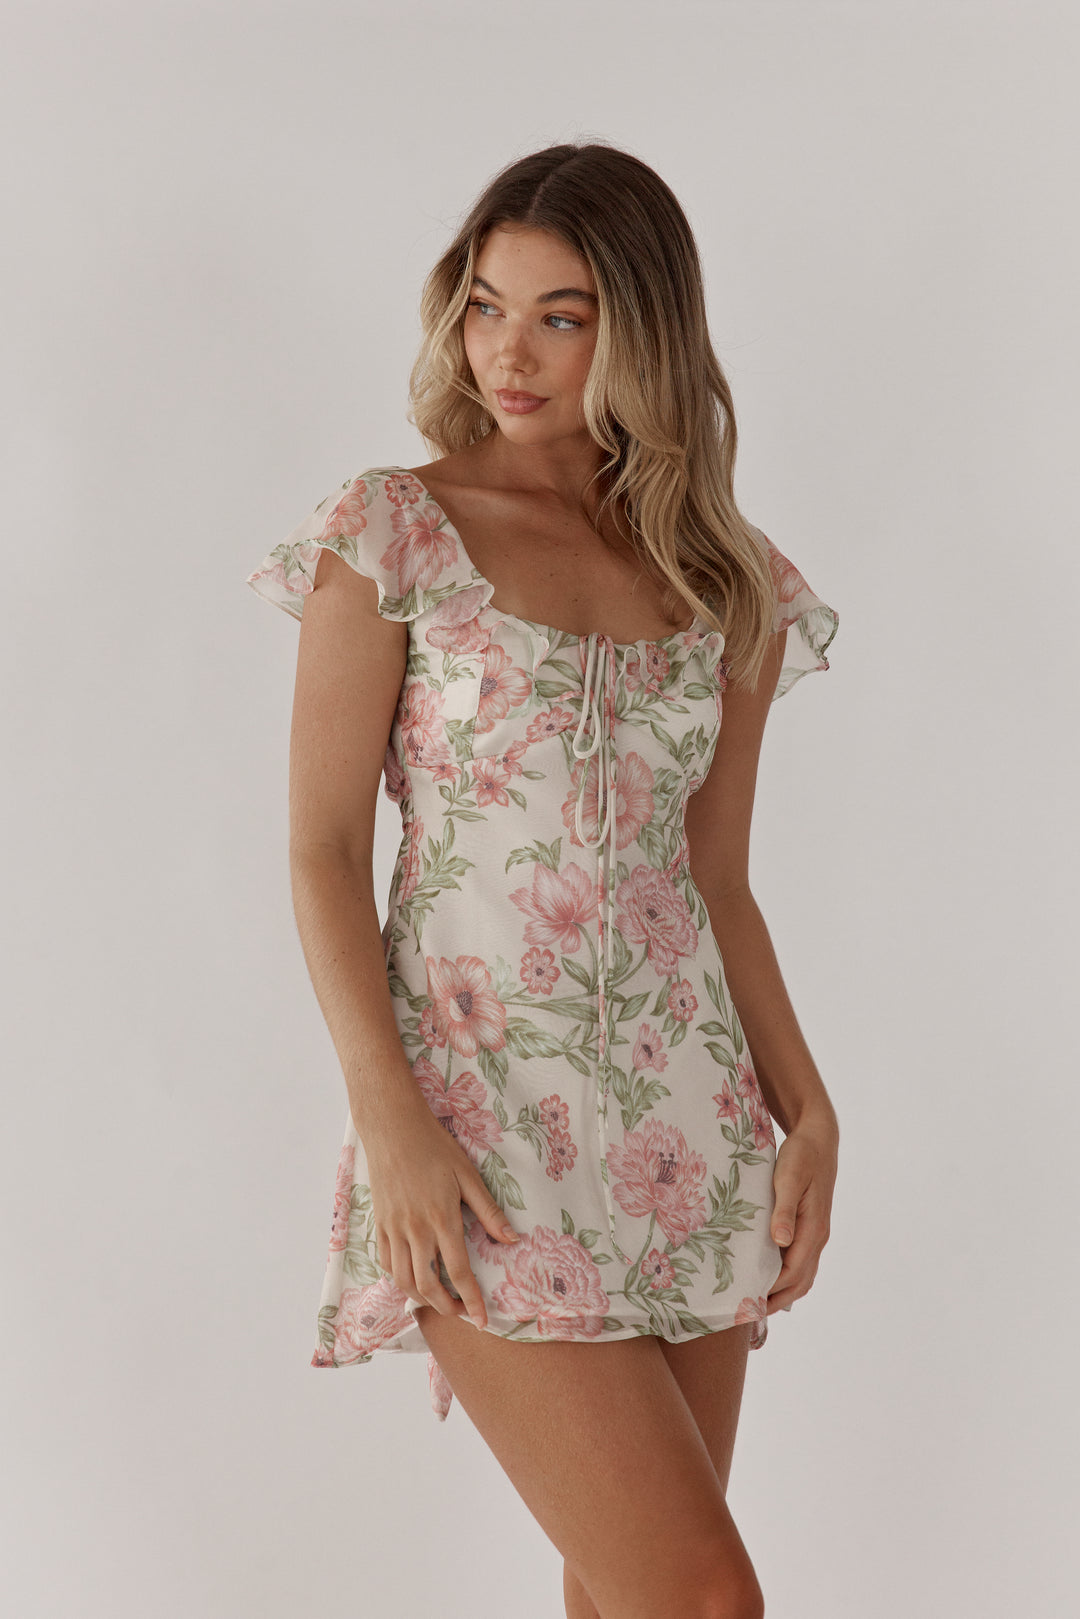 Silk floral mini dress perfect for romantic travels through europe